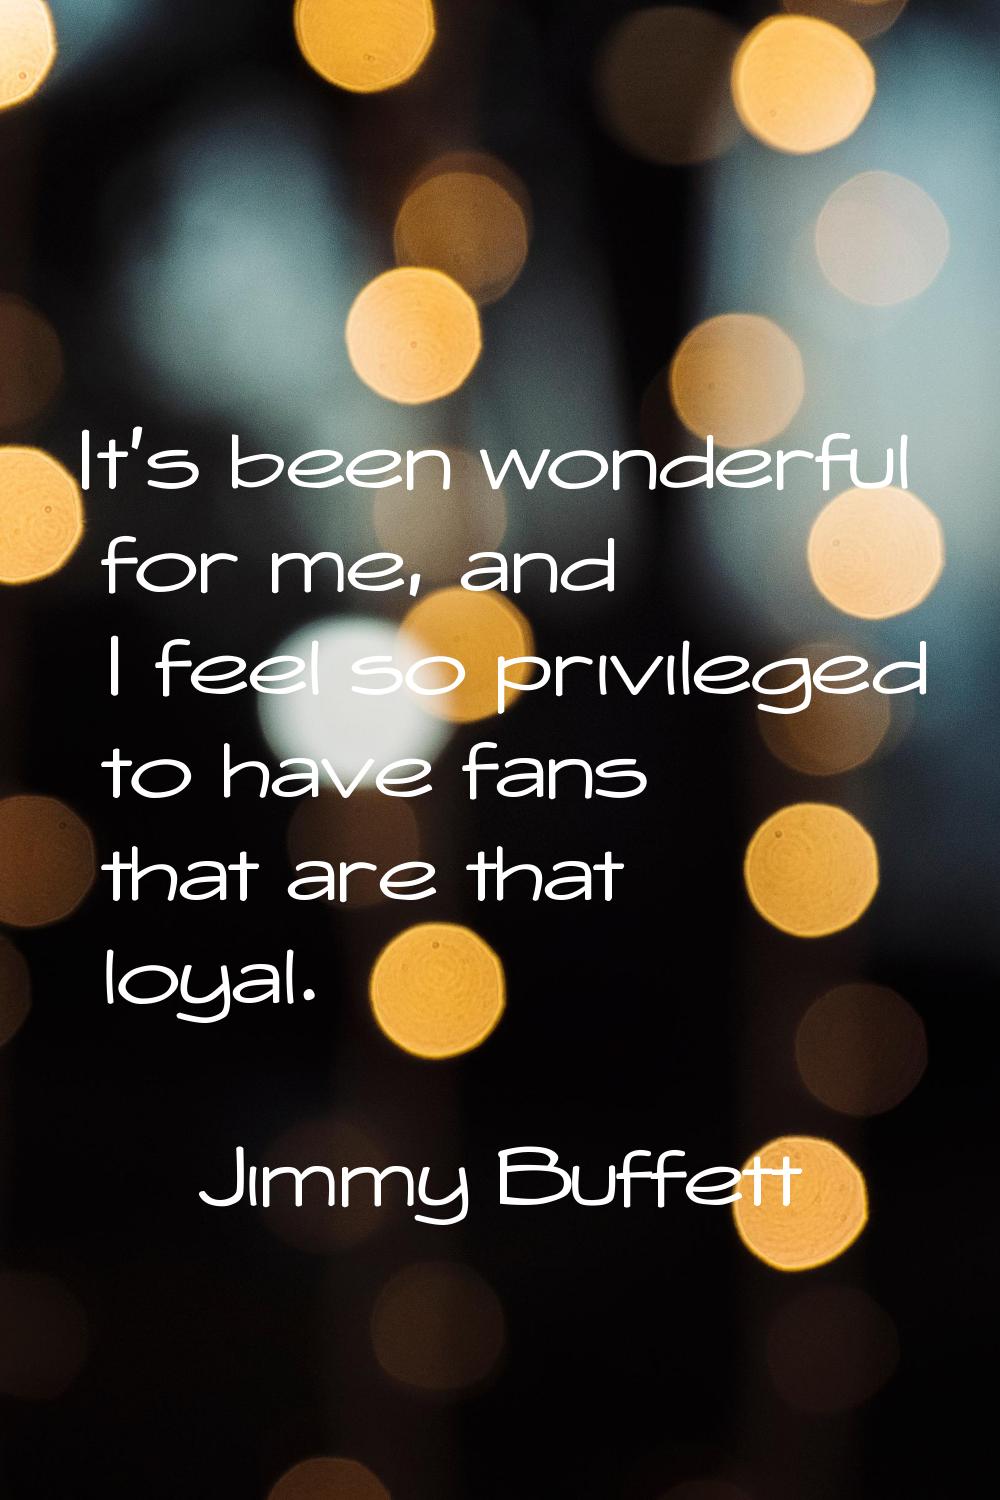 It's been wonderful for me, and I feel so privileged to have fans that are that loyal.